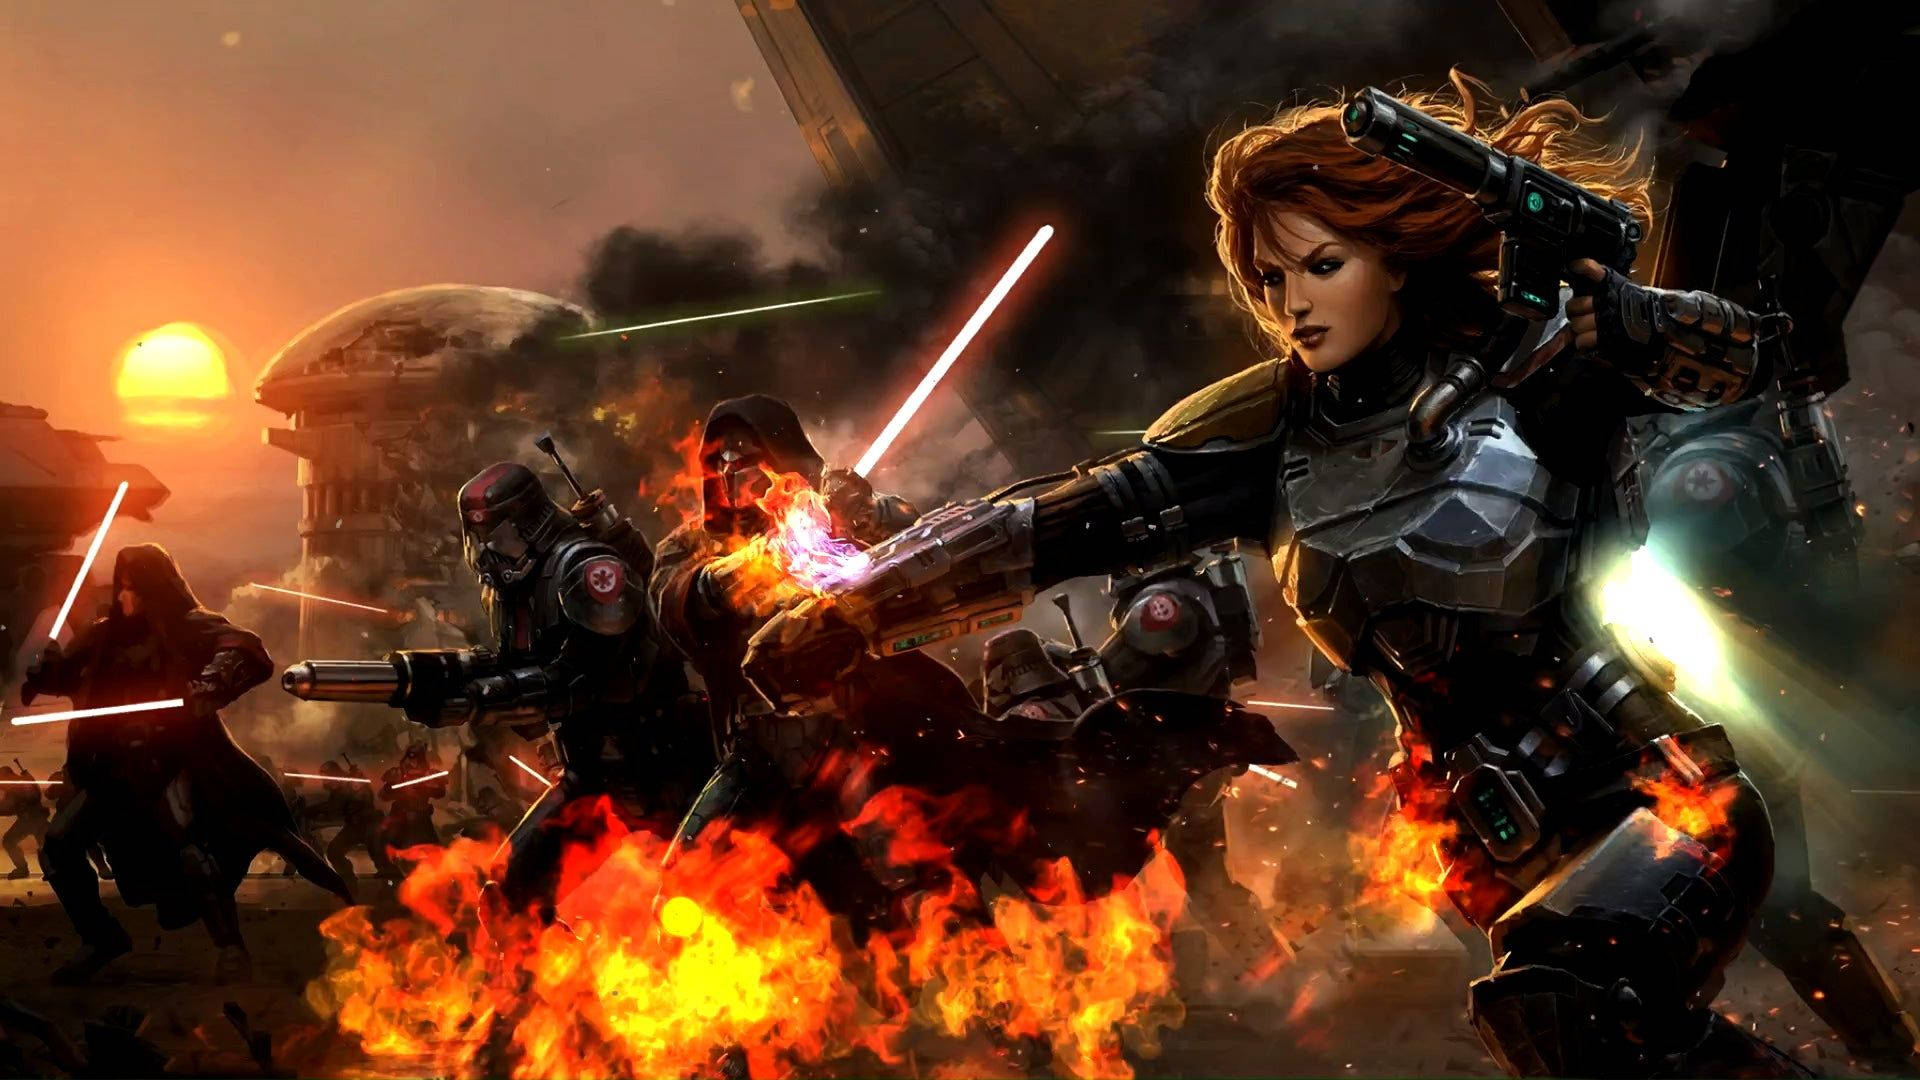 Swtor Sith Army In Battlefield Background